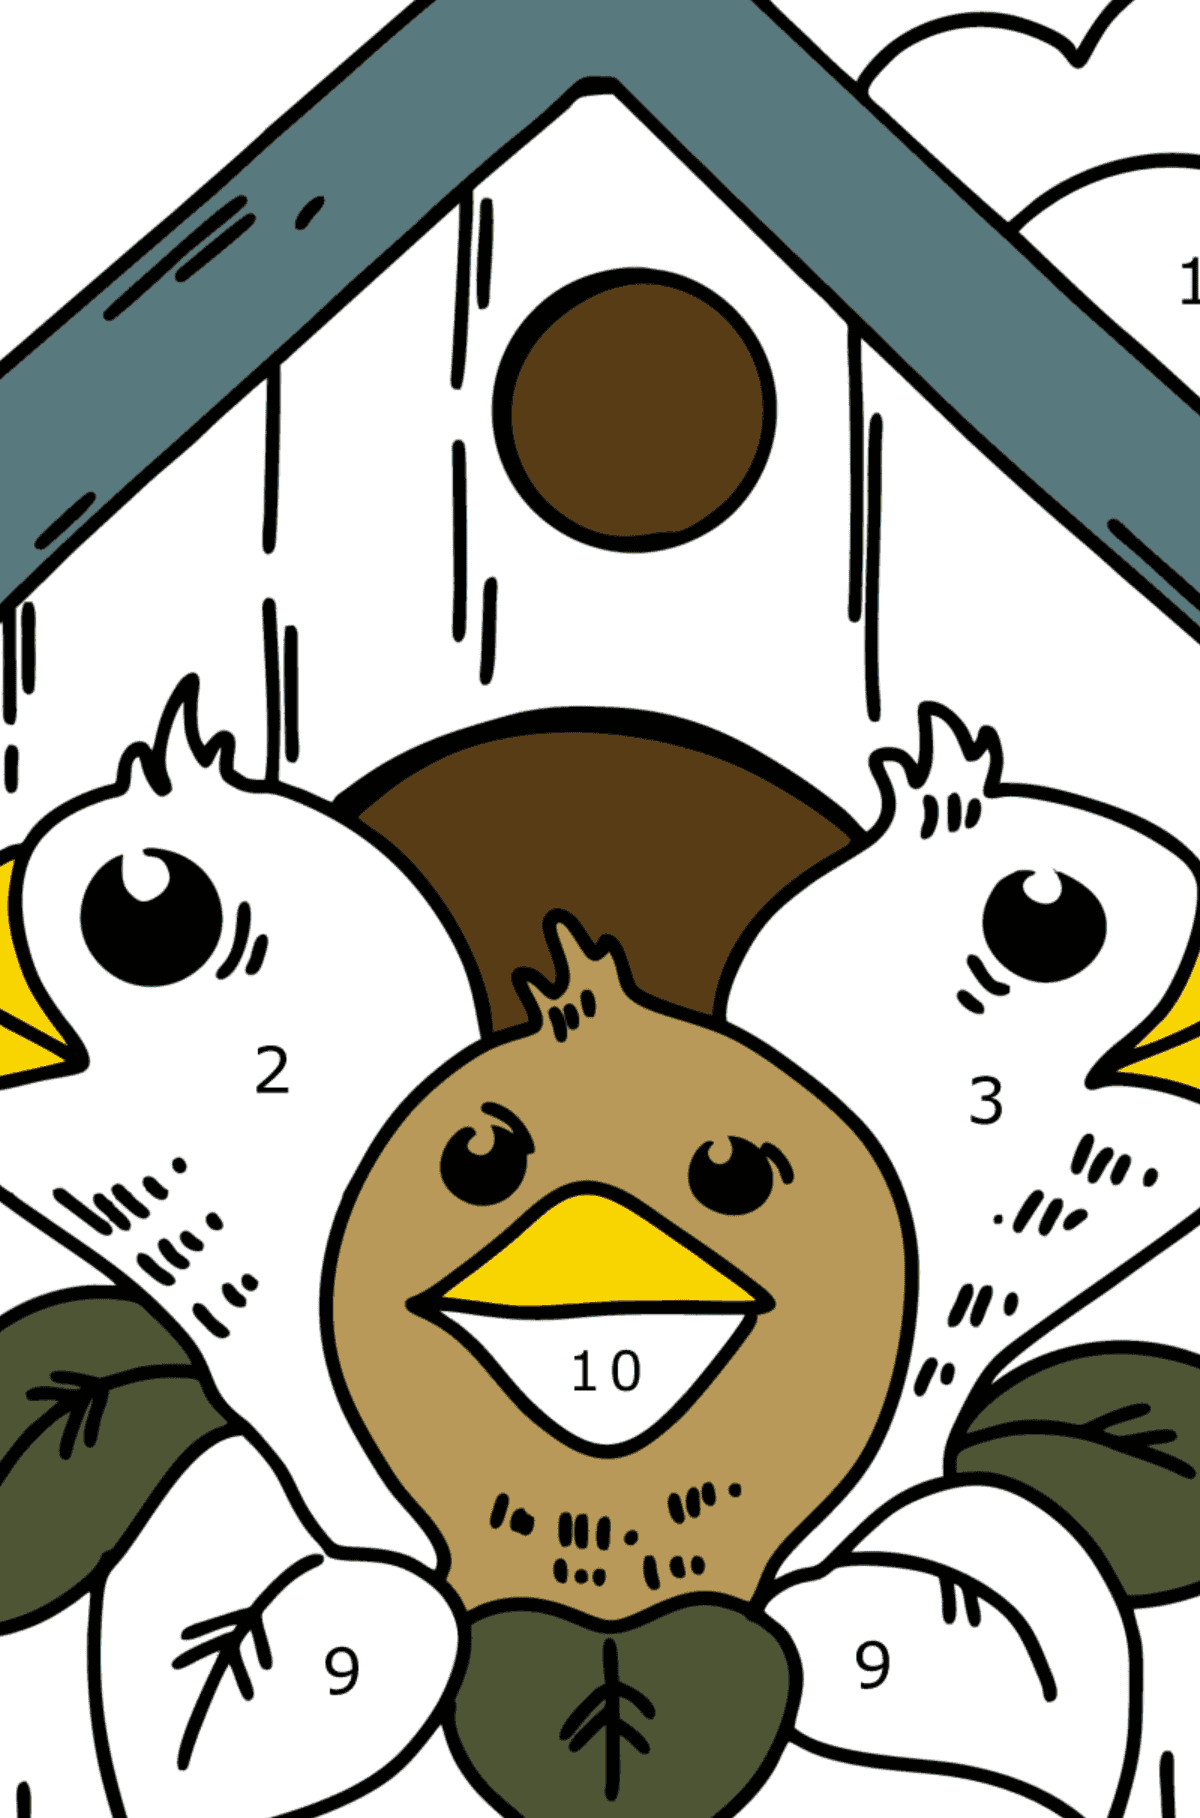 Chicks in a Birdhouse coloring page - Coloring by Numbers for Kids